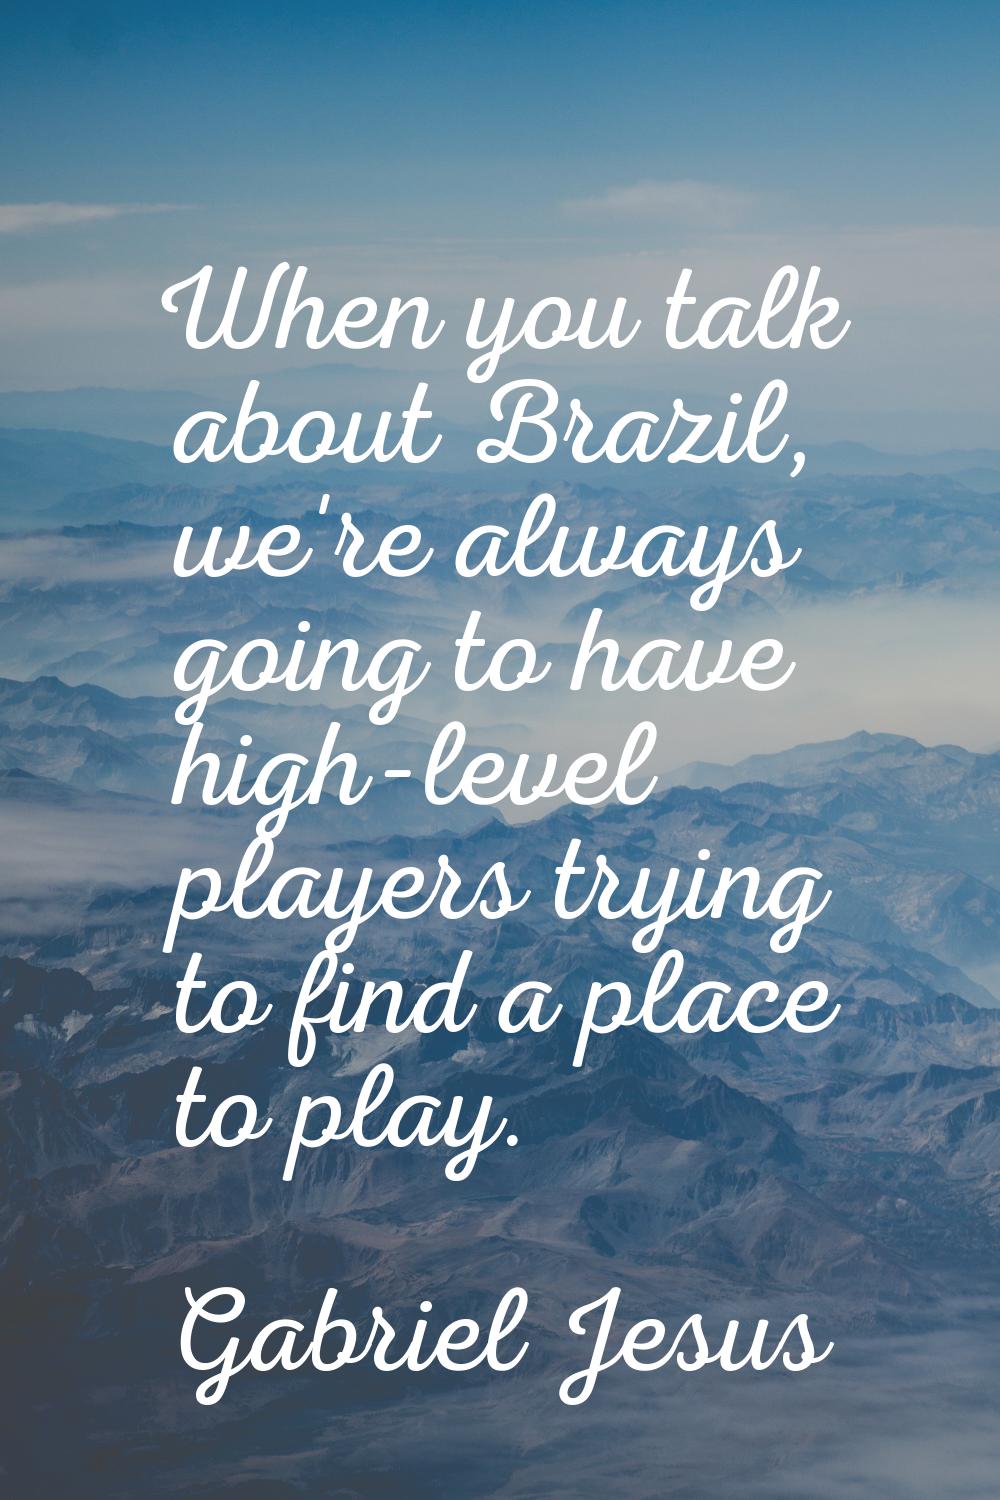 When you talk about Brazil, we're always going to have high-level players trying to find a place to